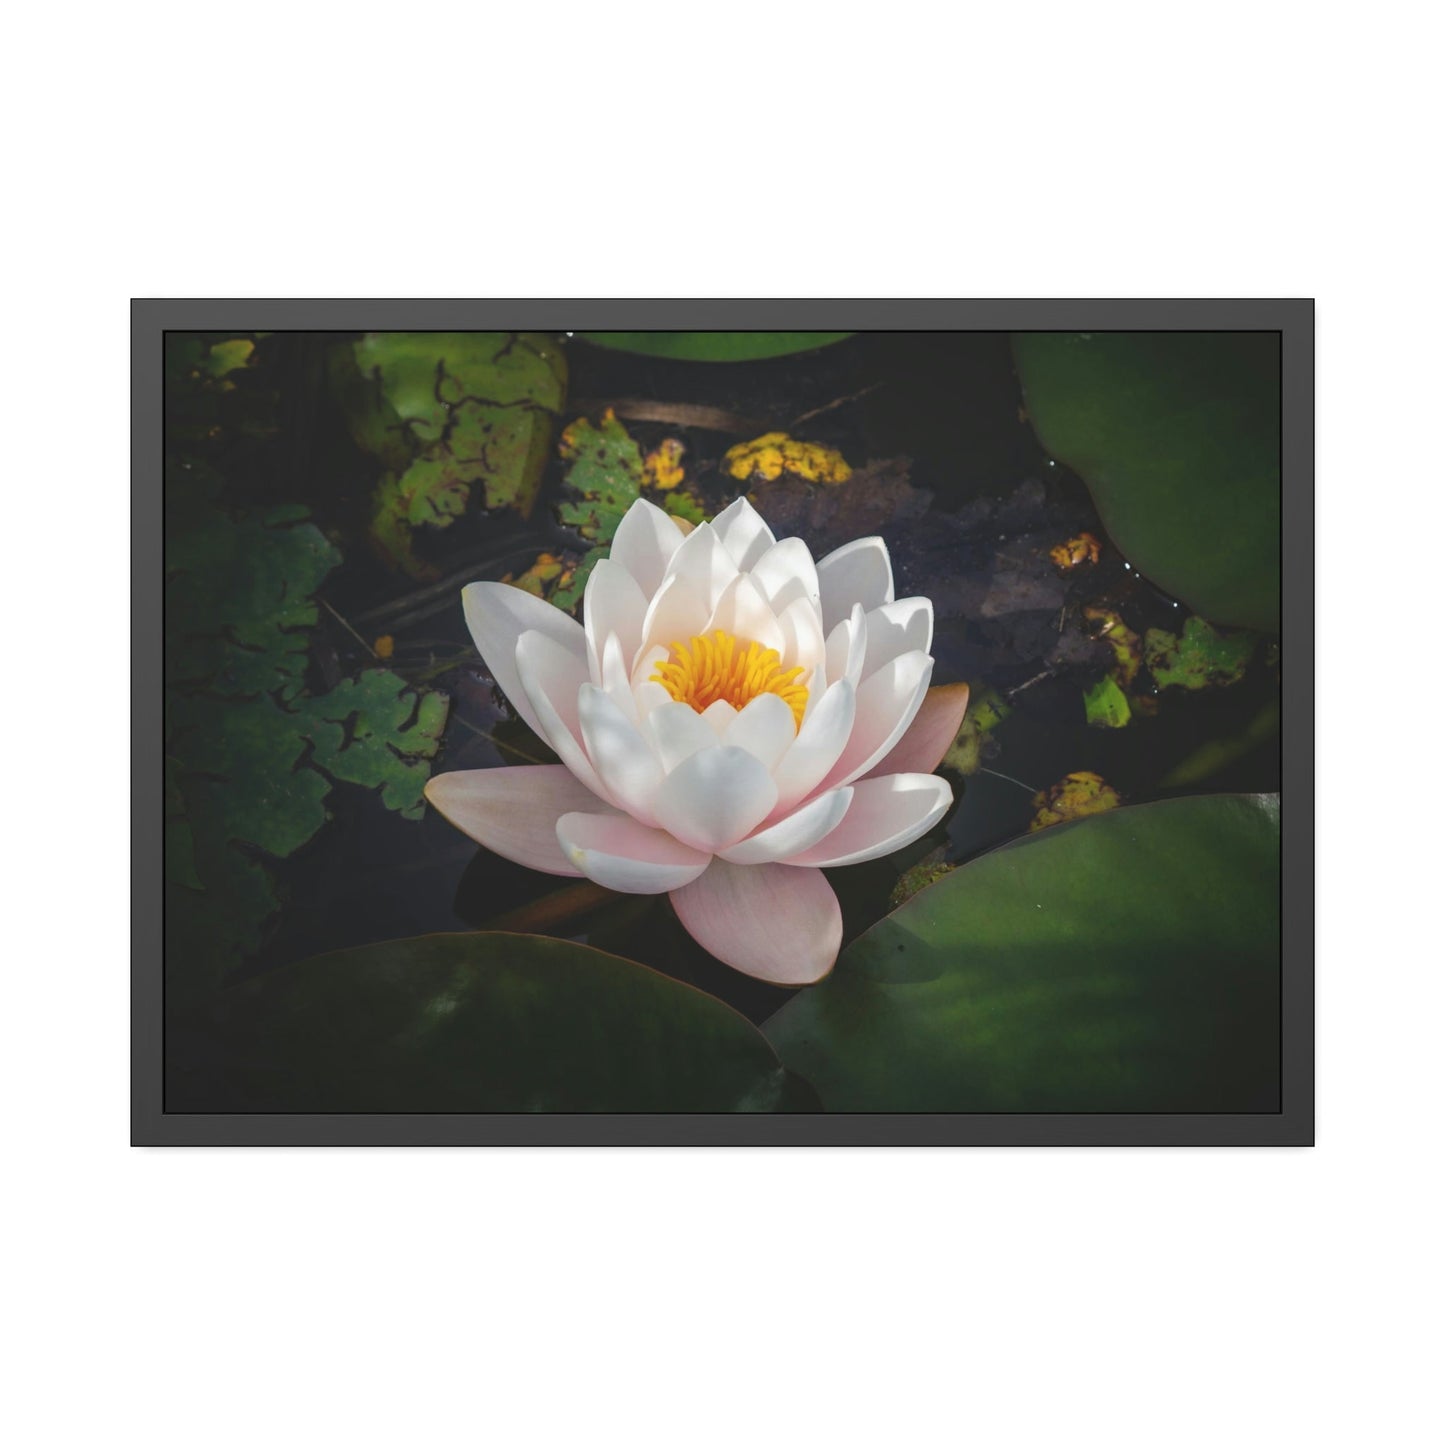 Tranquil Waters: A Canvas Depiction of Lilies Afloat